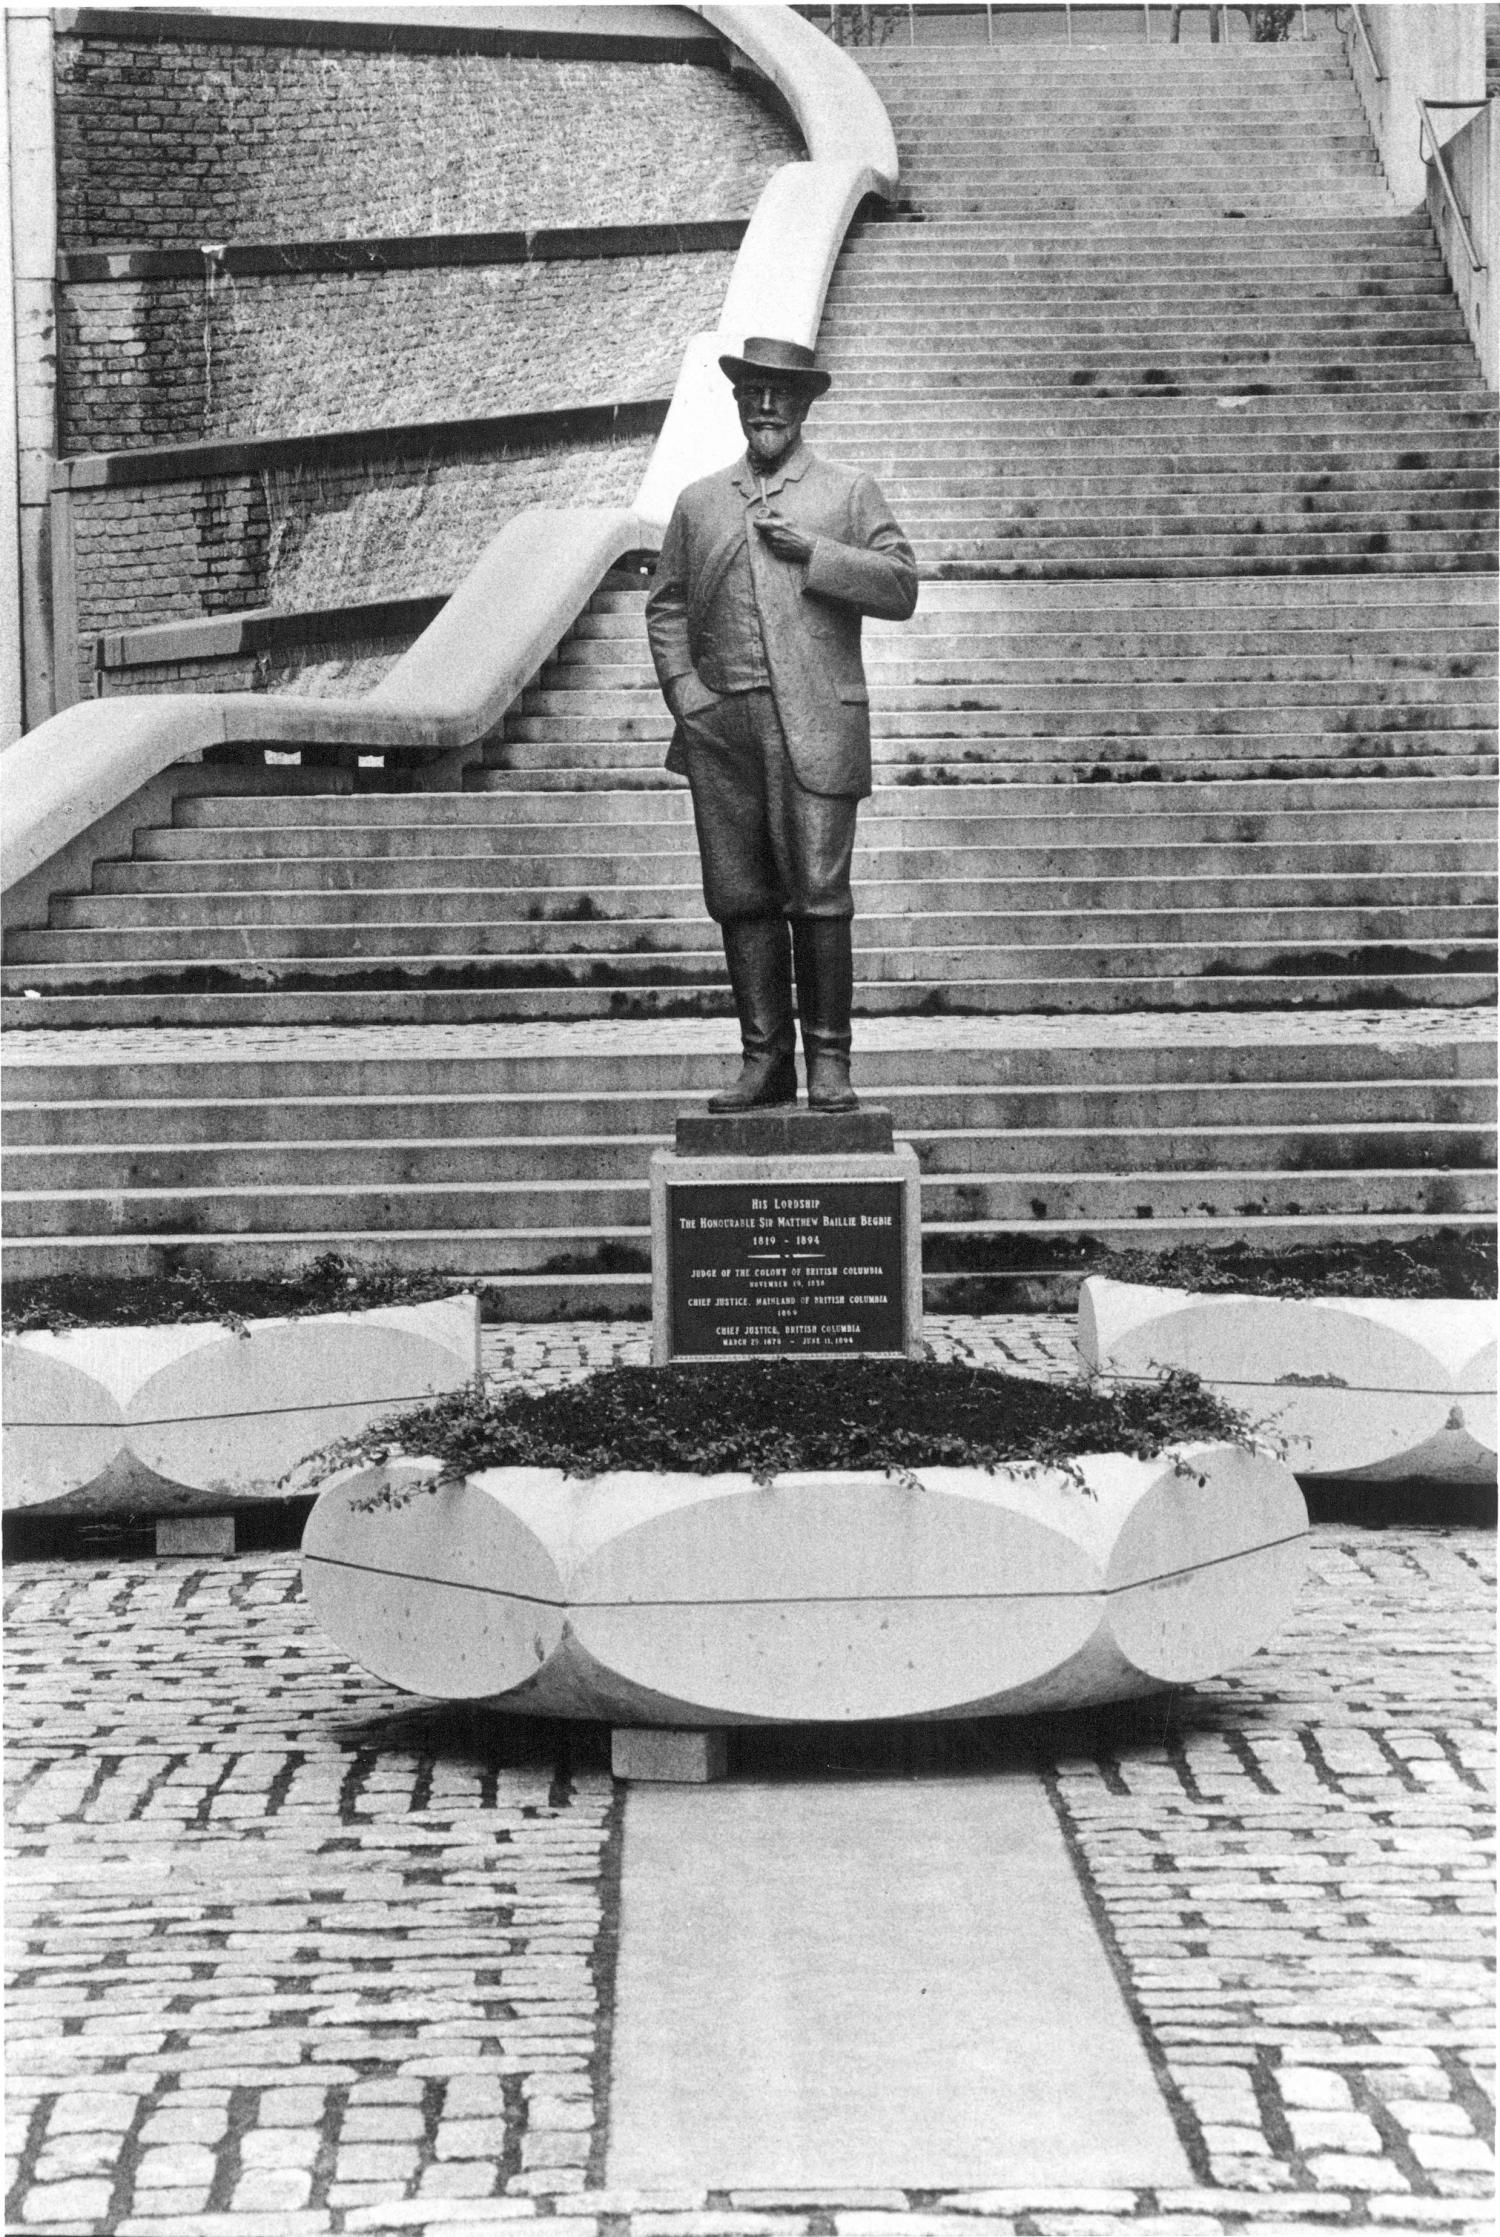 A photo of the statue of Judge Begbie